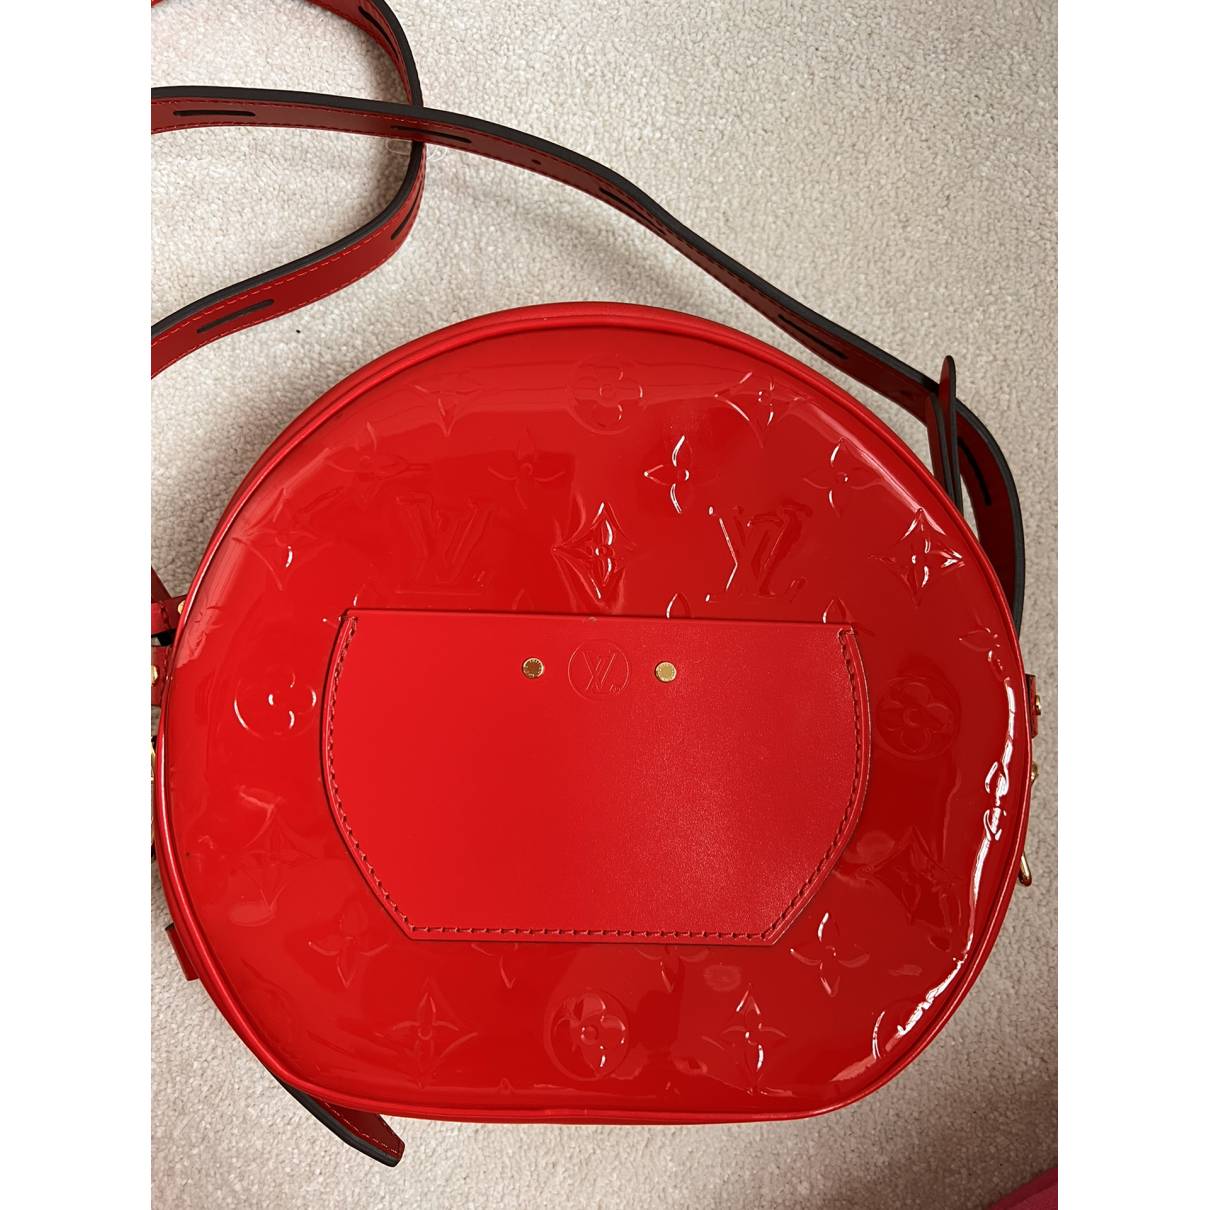 Louis+Vuitton+Speedy+Shoulder+Bag+Red+Leather for sale online